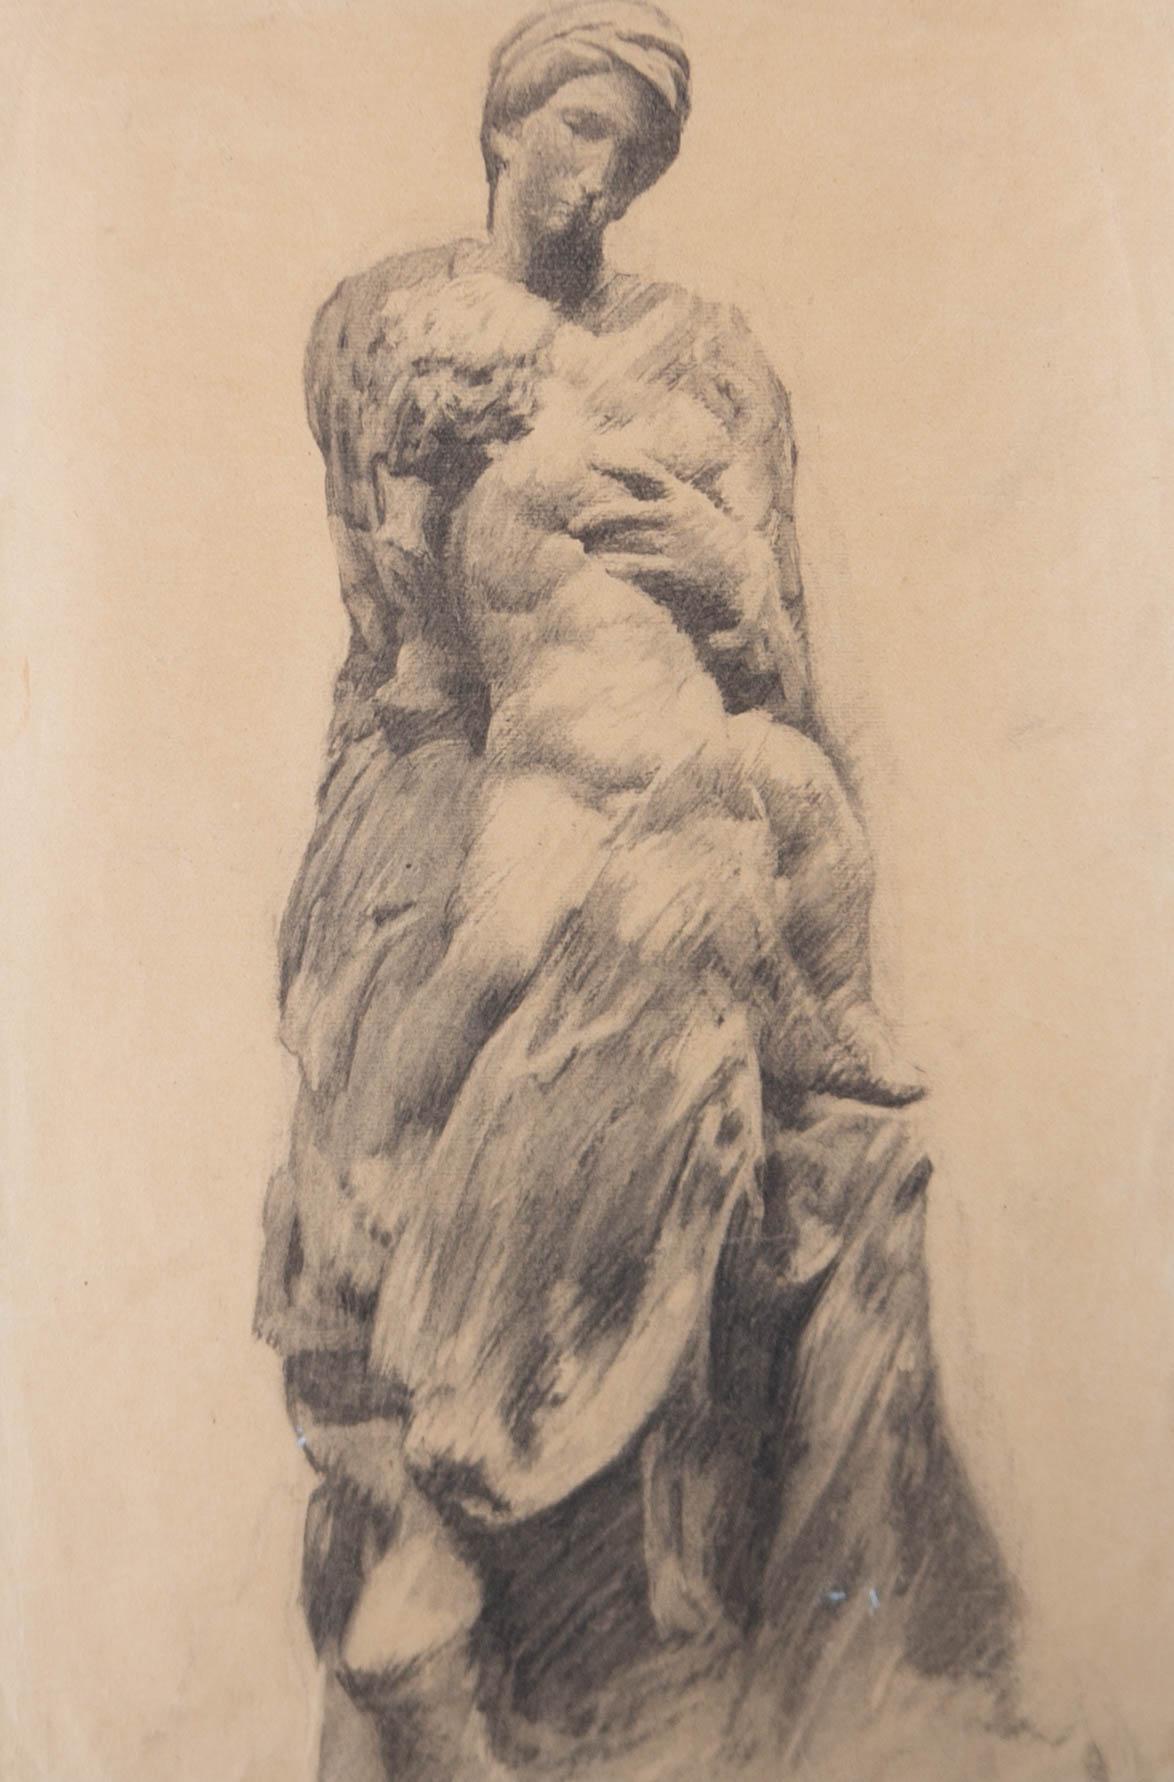 A fine graphite study of the Medici Madonna, a marble sculpture carved by Italian Renaissance master Michelangelo Buonarroti that measures about 88.98 inches (226 cm) in height. Dating from 1521â€“1534 the sculpture is a piece of the altar